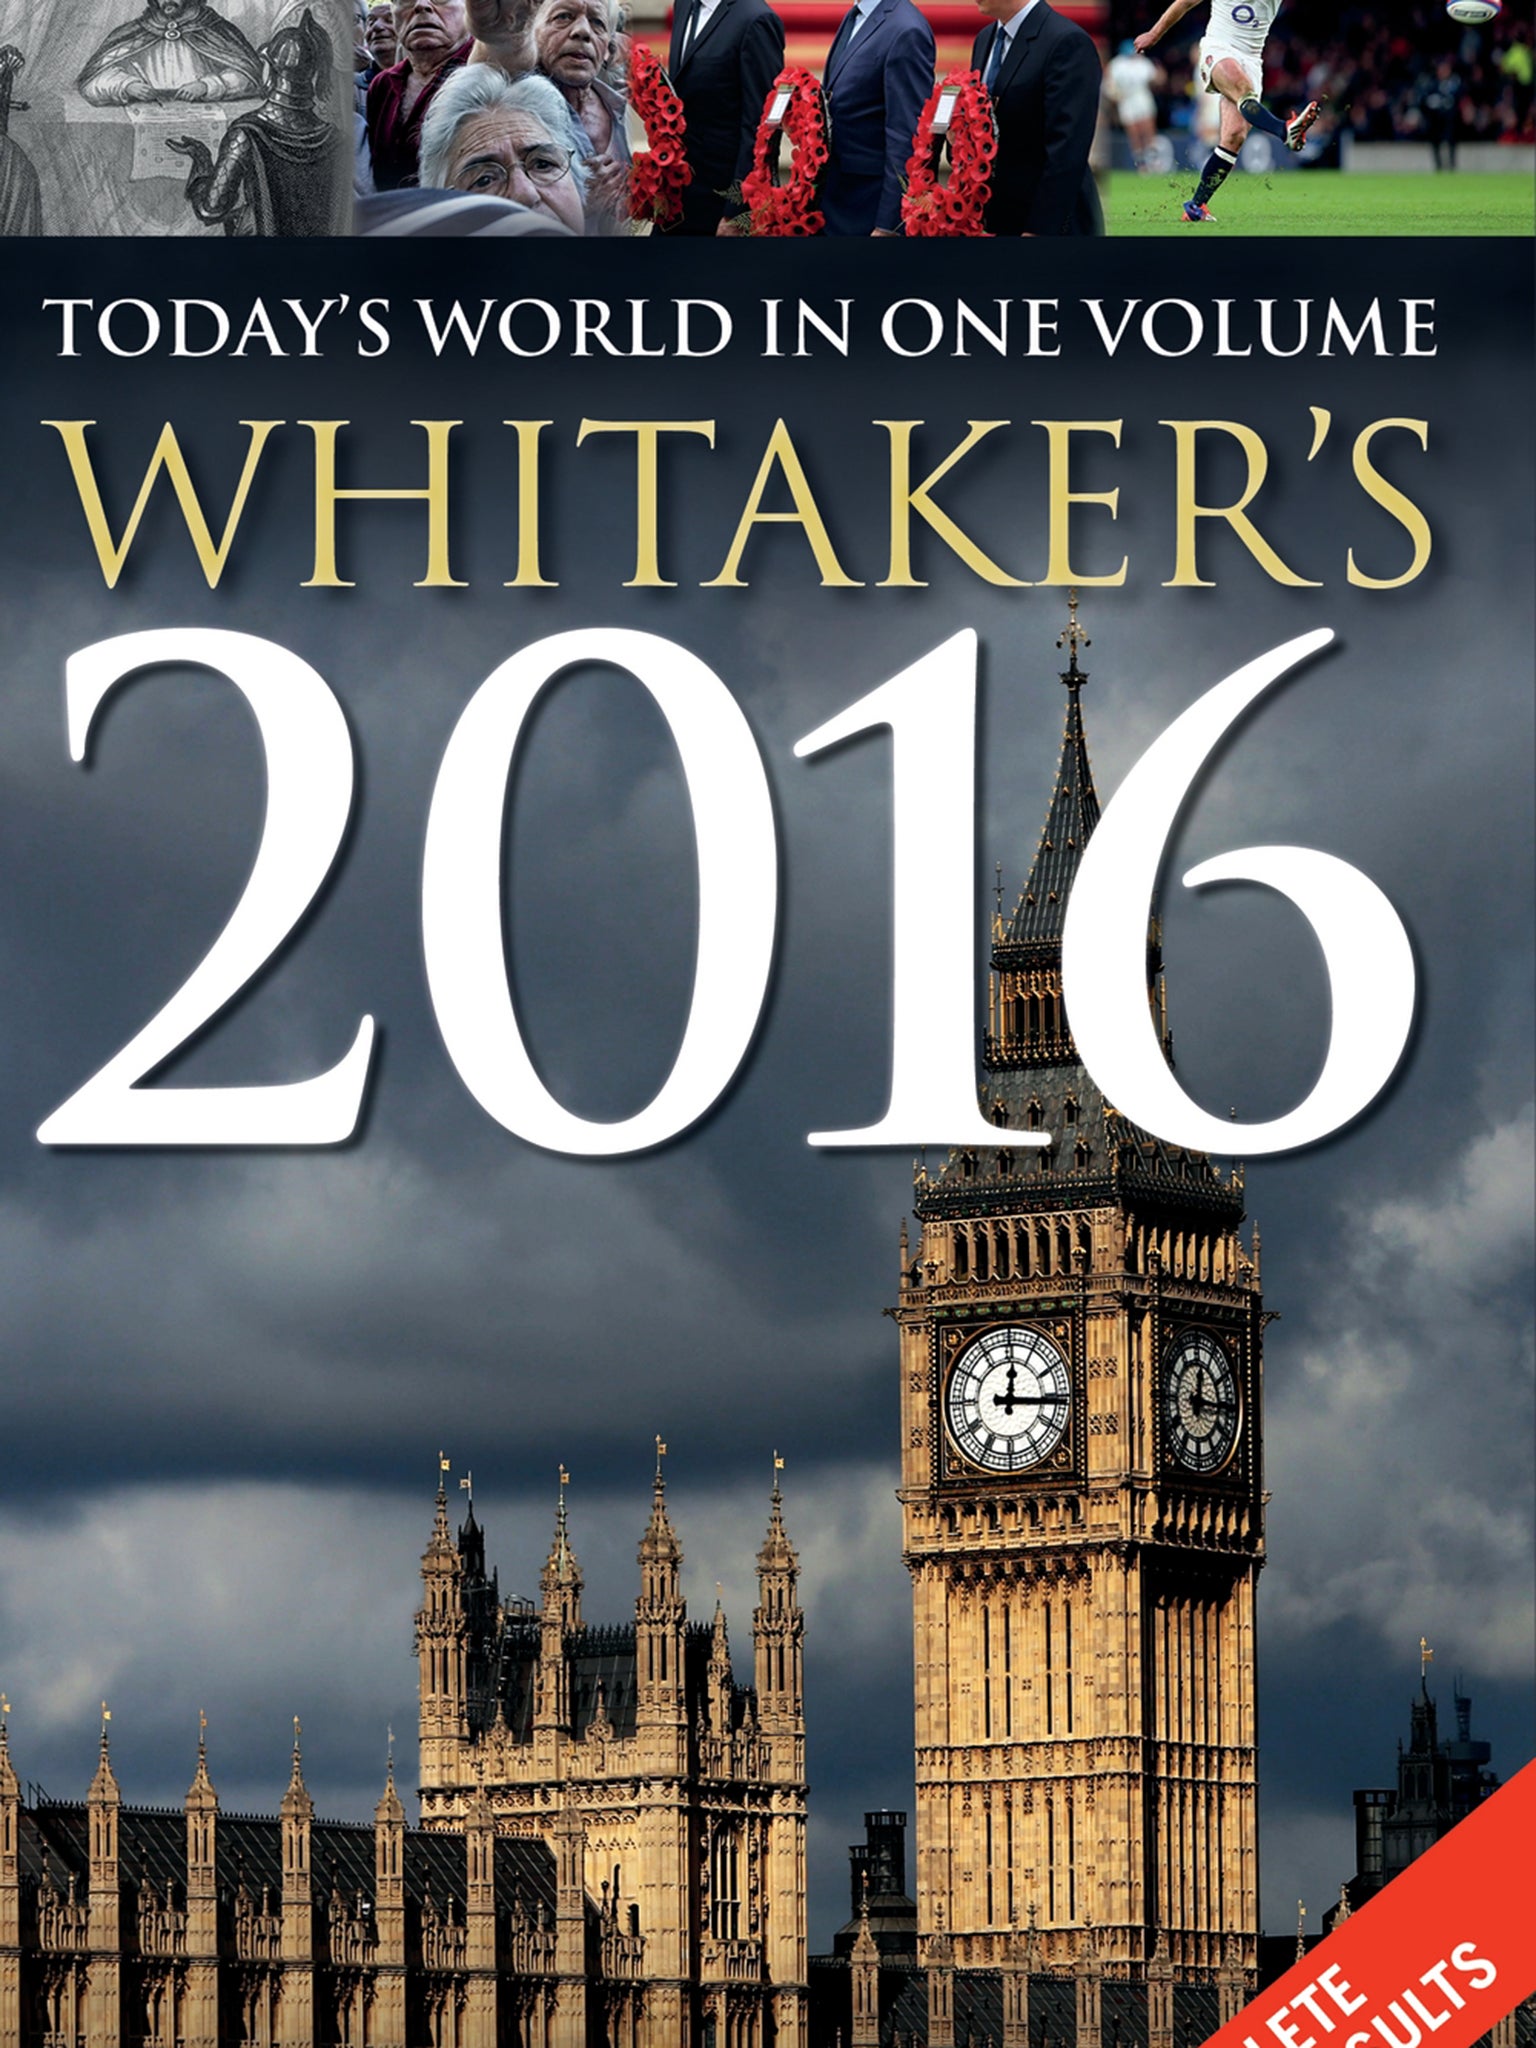 Whitaker's is the ultimate single-volume reference source - packed with thousands of facts, figures, overviews and statistics relating to the UK and the world.